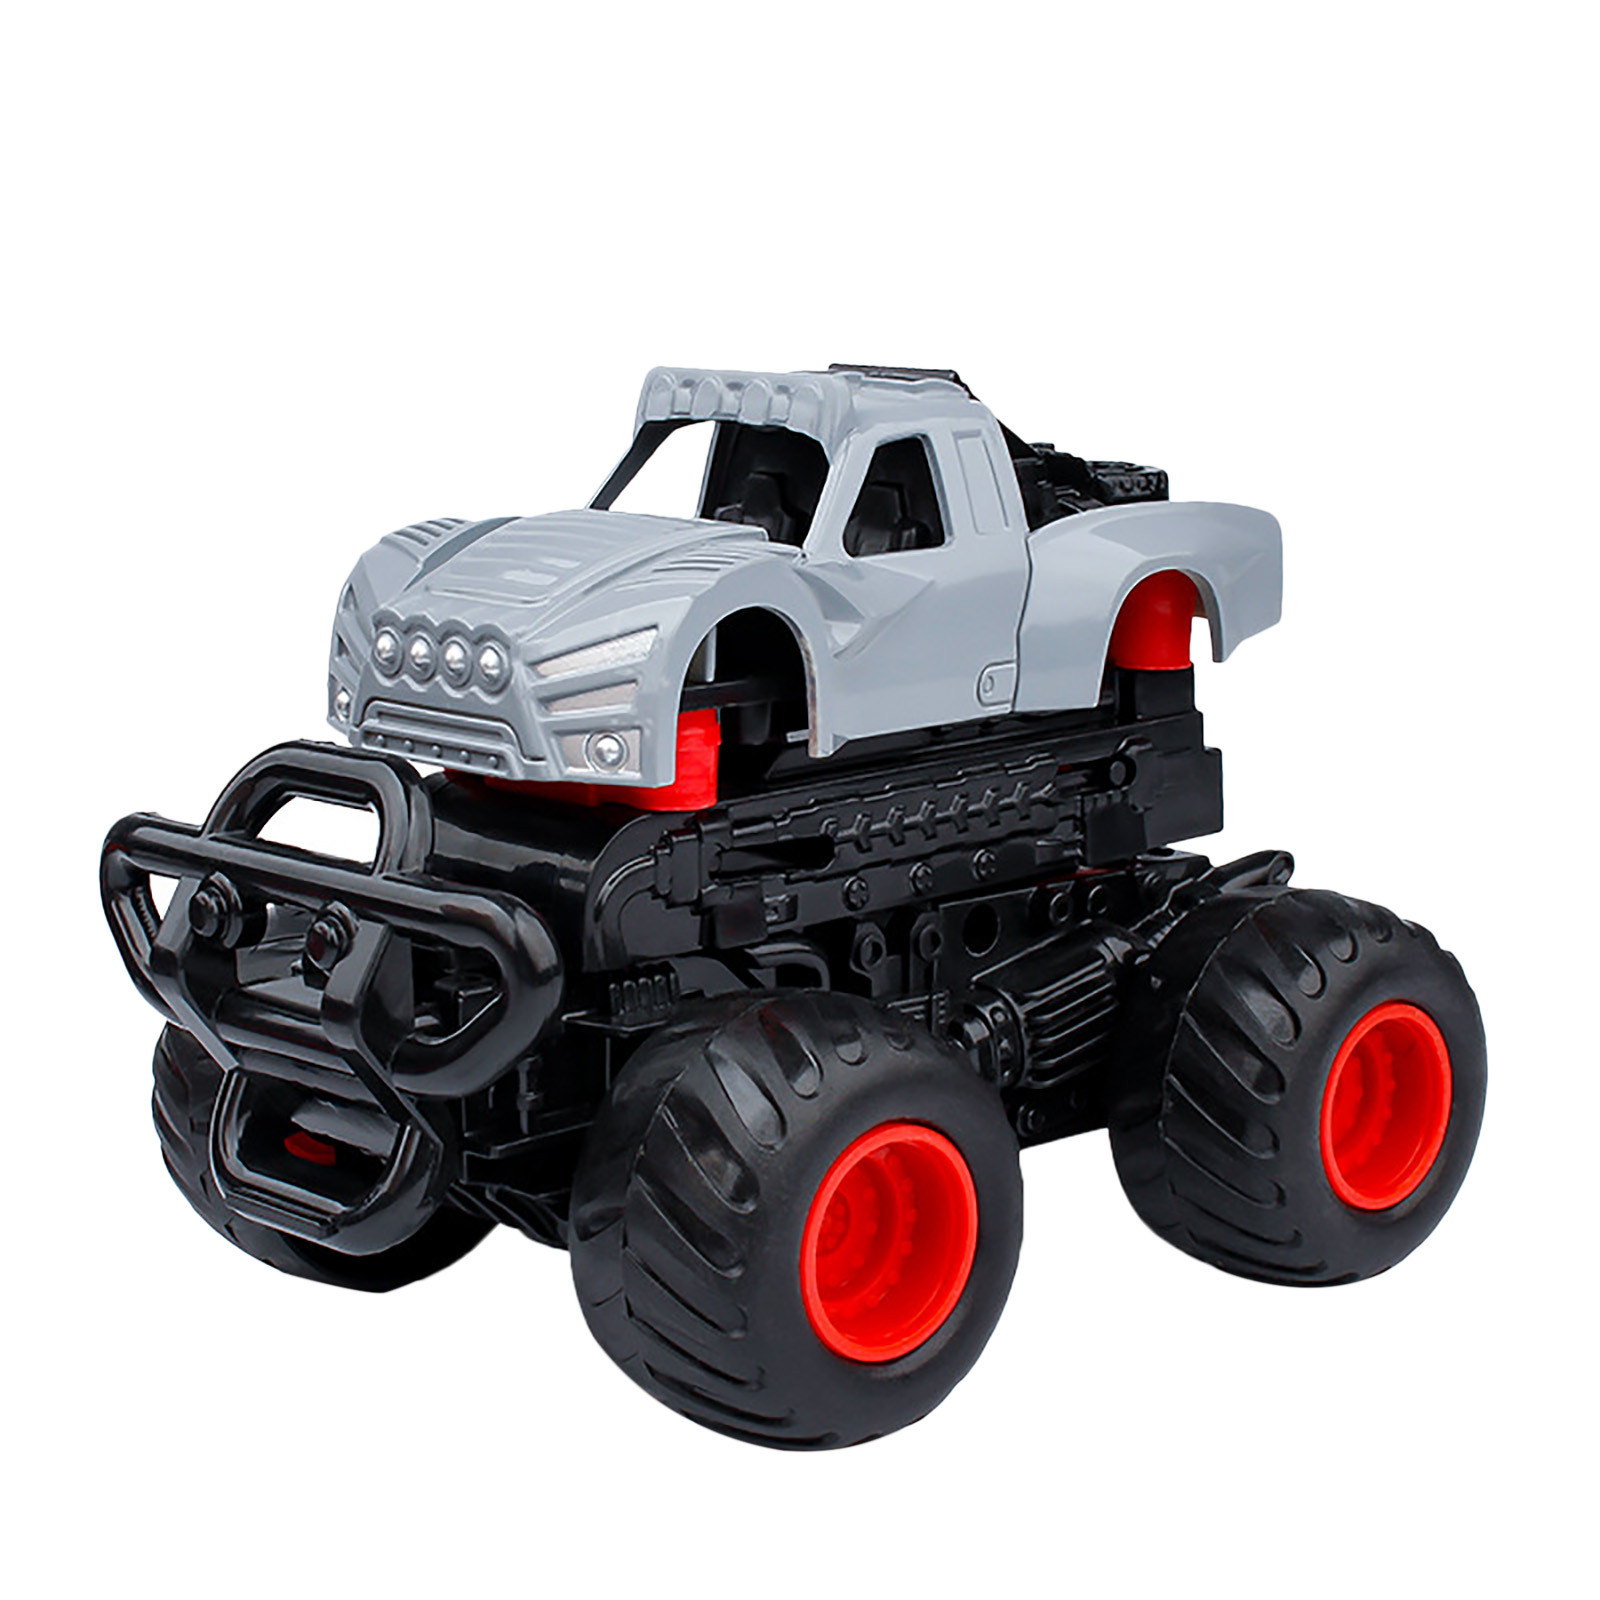 Otawa Four-Wheel Drive Inertia-Stunt Bounce Deformation Car Off Road Model Car Vehicle Kids Toy Mini Car Truck Playset for Boys Girls Toddler Gifts for Kids Birthday